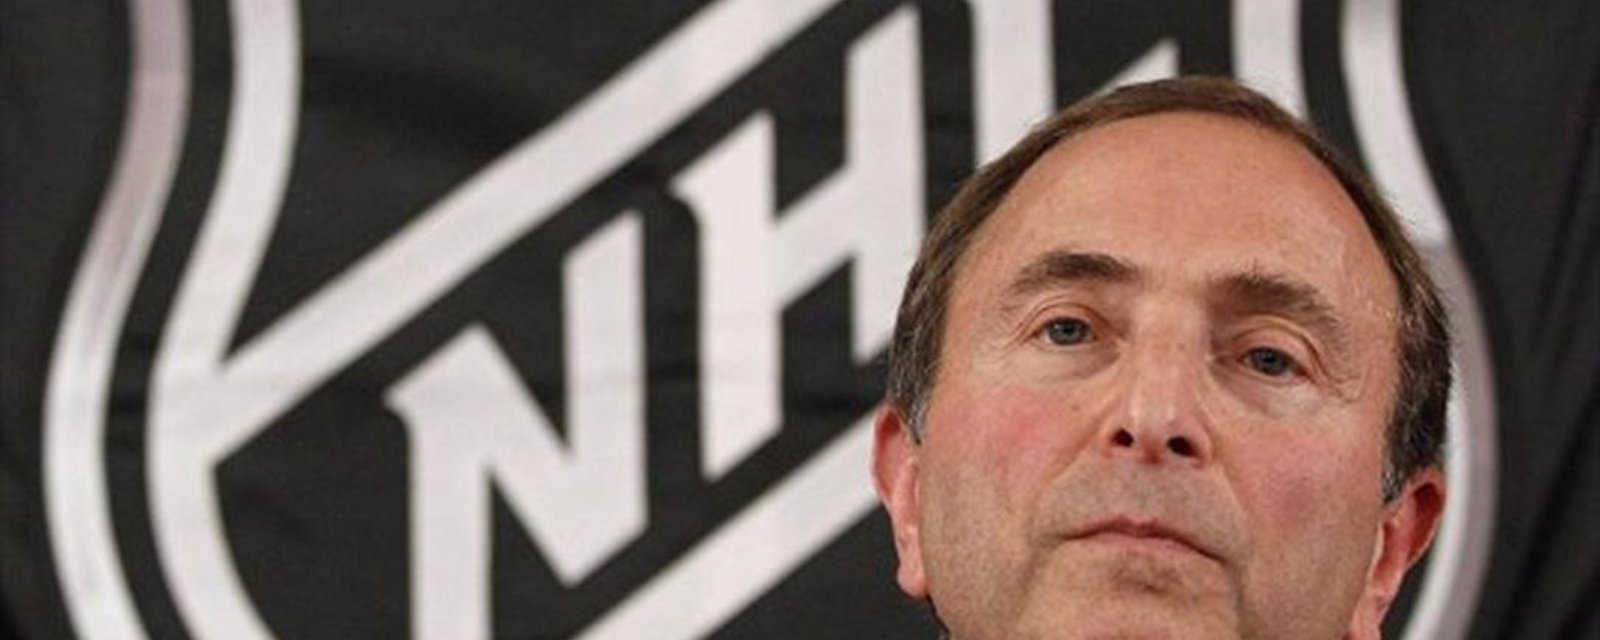 Gary Bettman has the final say on whether a player is fit to play or not!